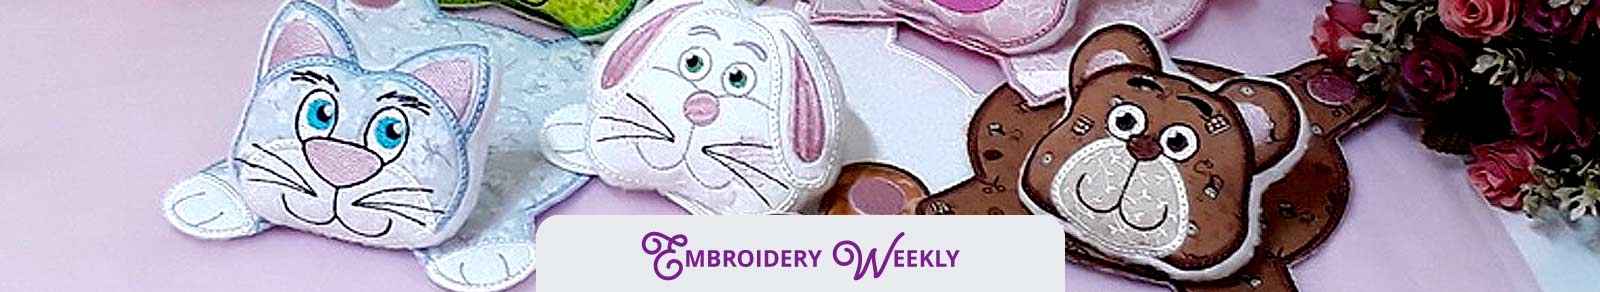 Embroidery Weekly